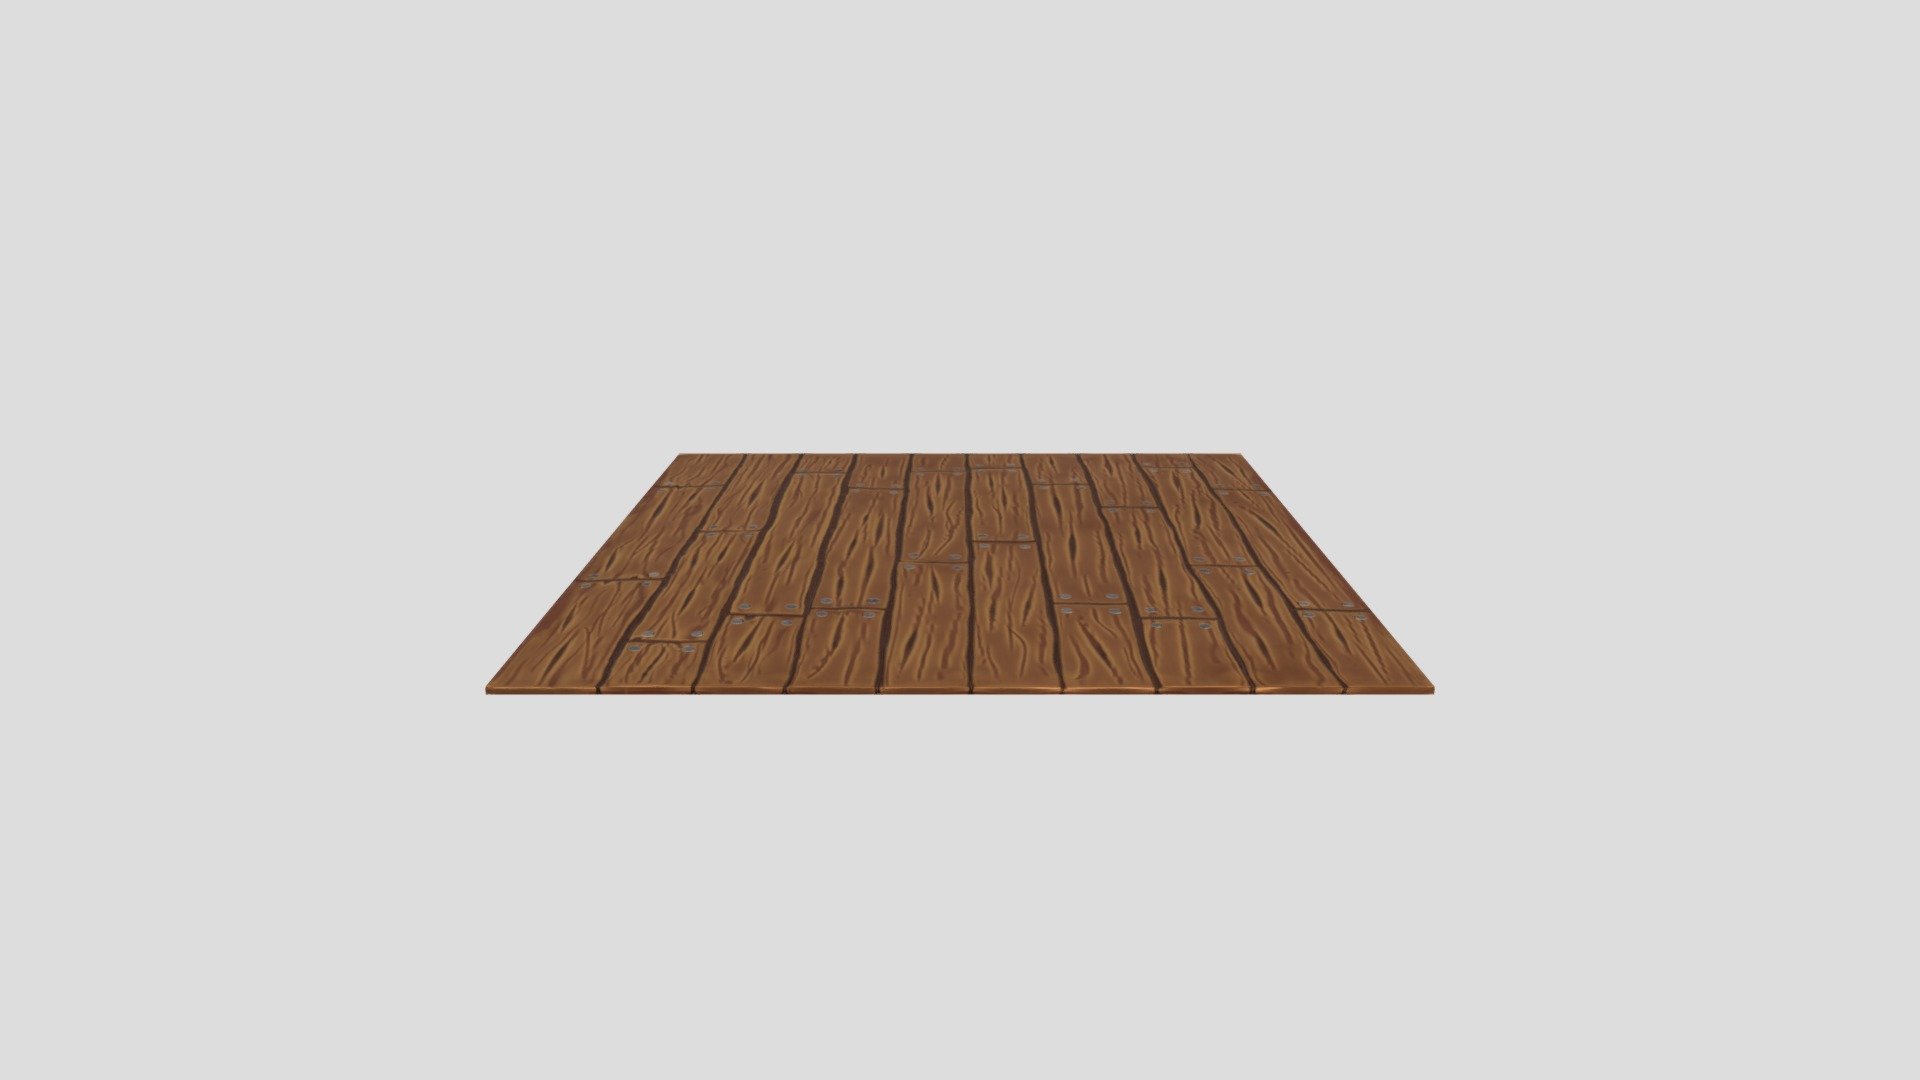 A tileable wood floor texture I did for class. It took me a while to get the hang of this texture but im happy with the results 3d model